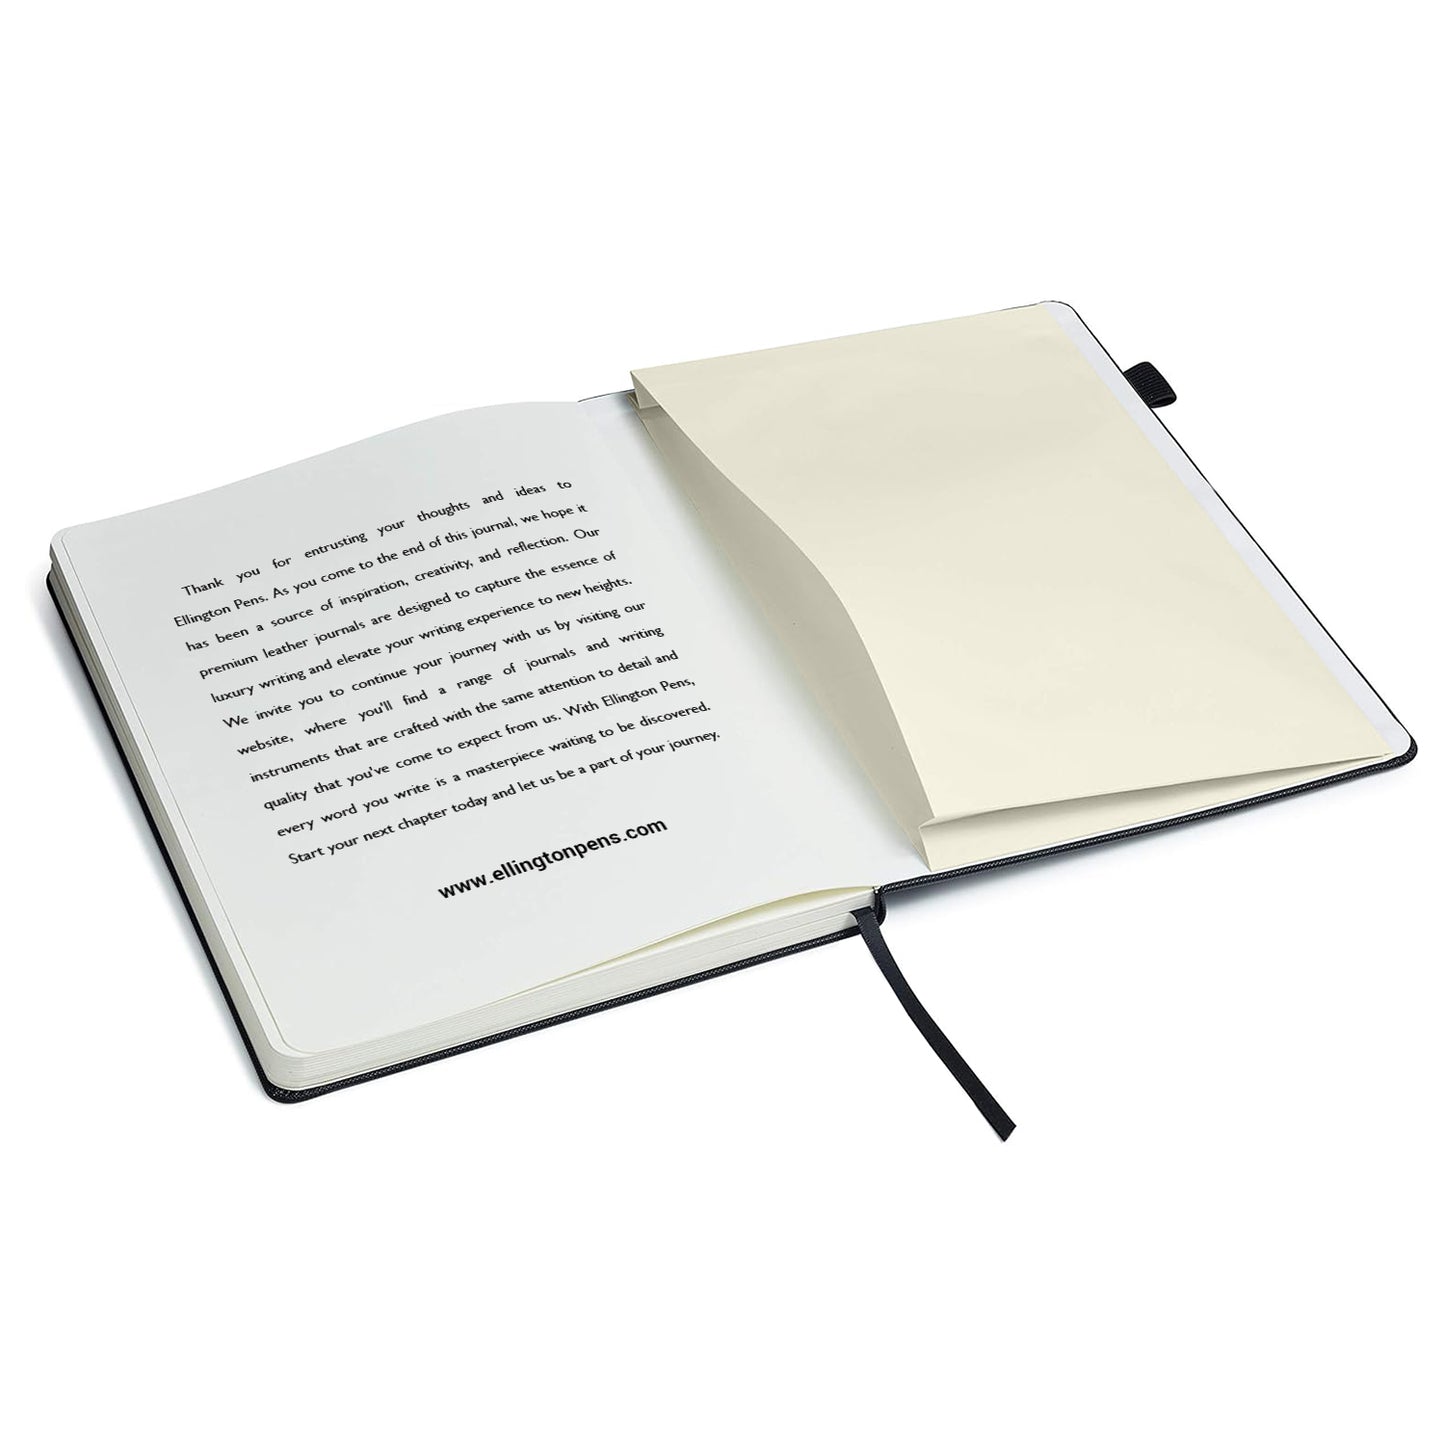 The Stealth Journal and Pen Gift Set